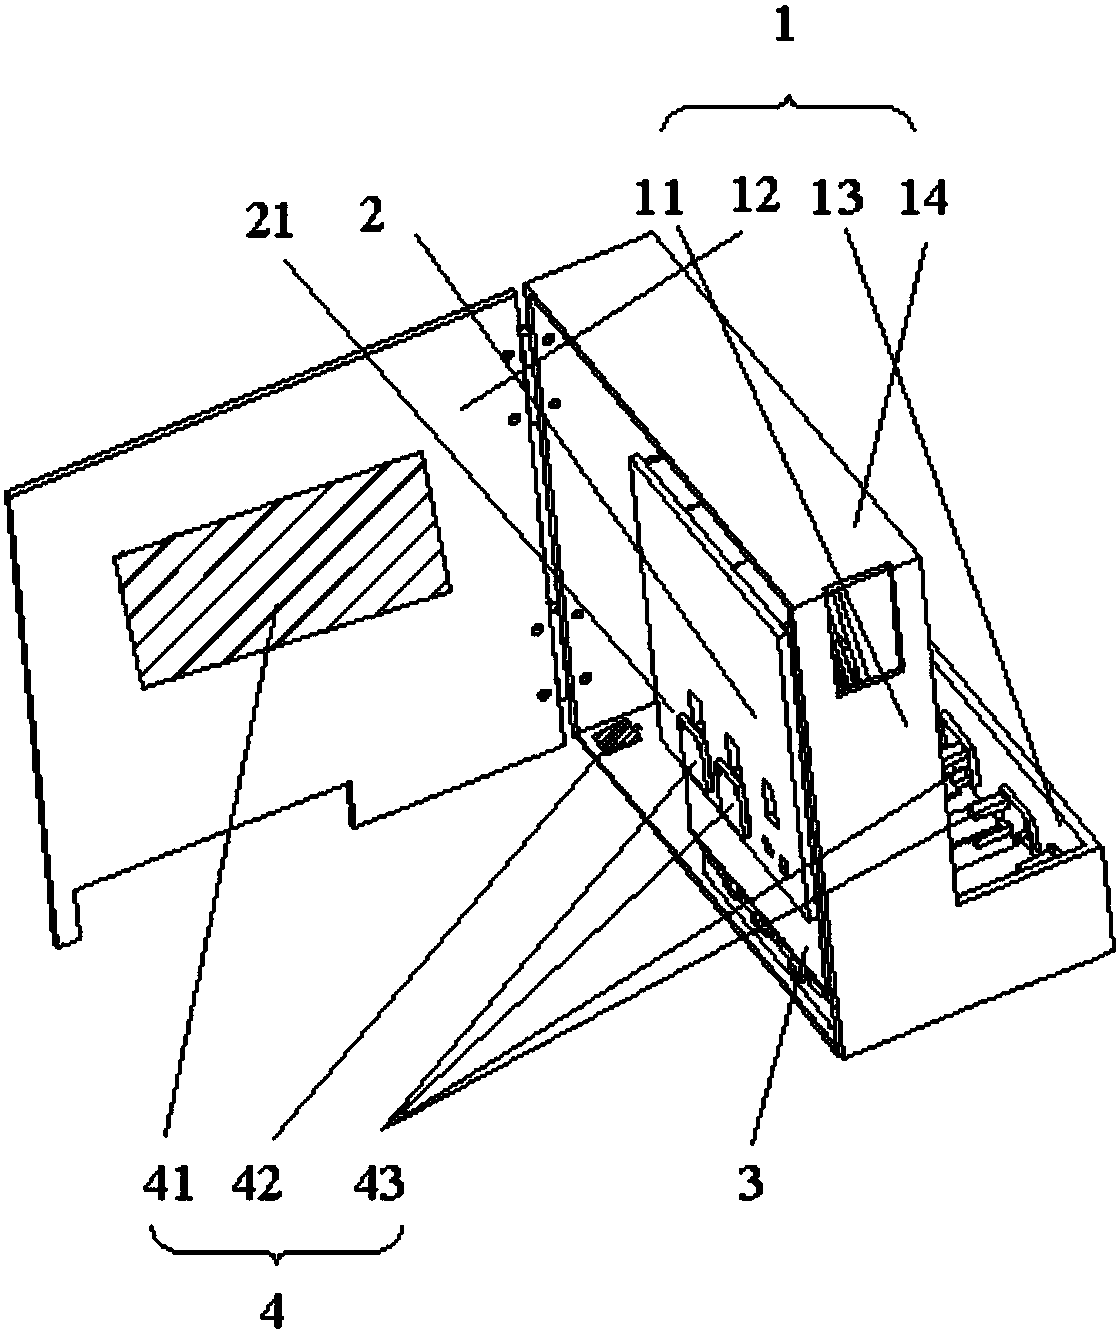 A sorting and withdrawing device for household coins